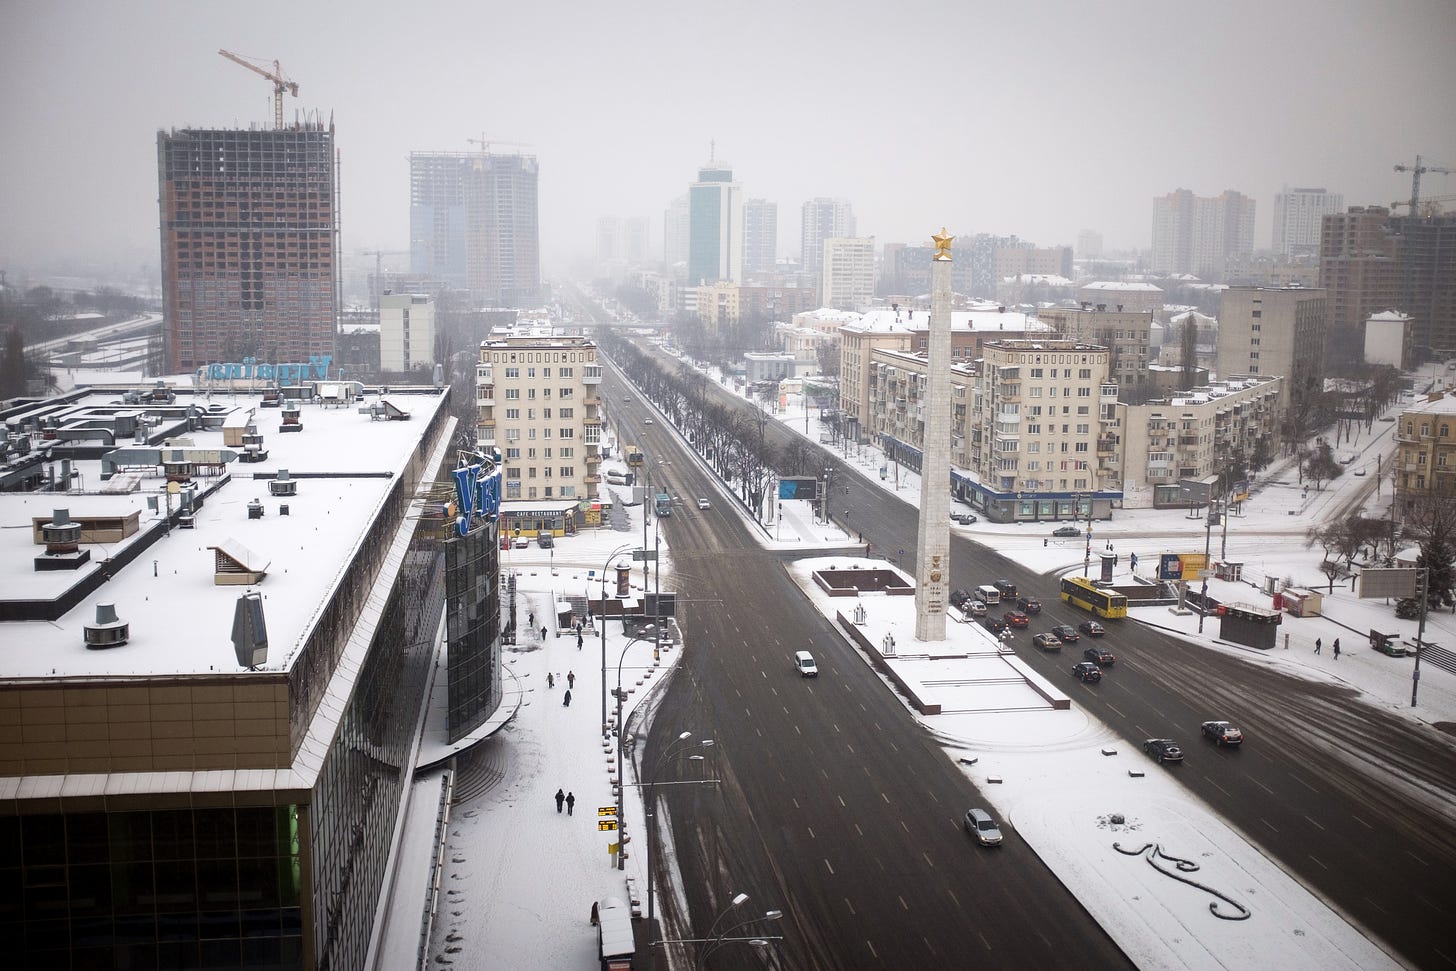 A view from a tall building above a snowy Kiev.